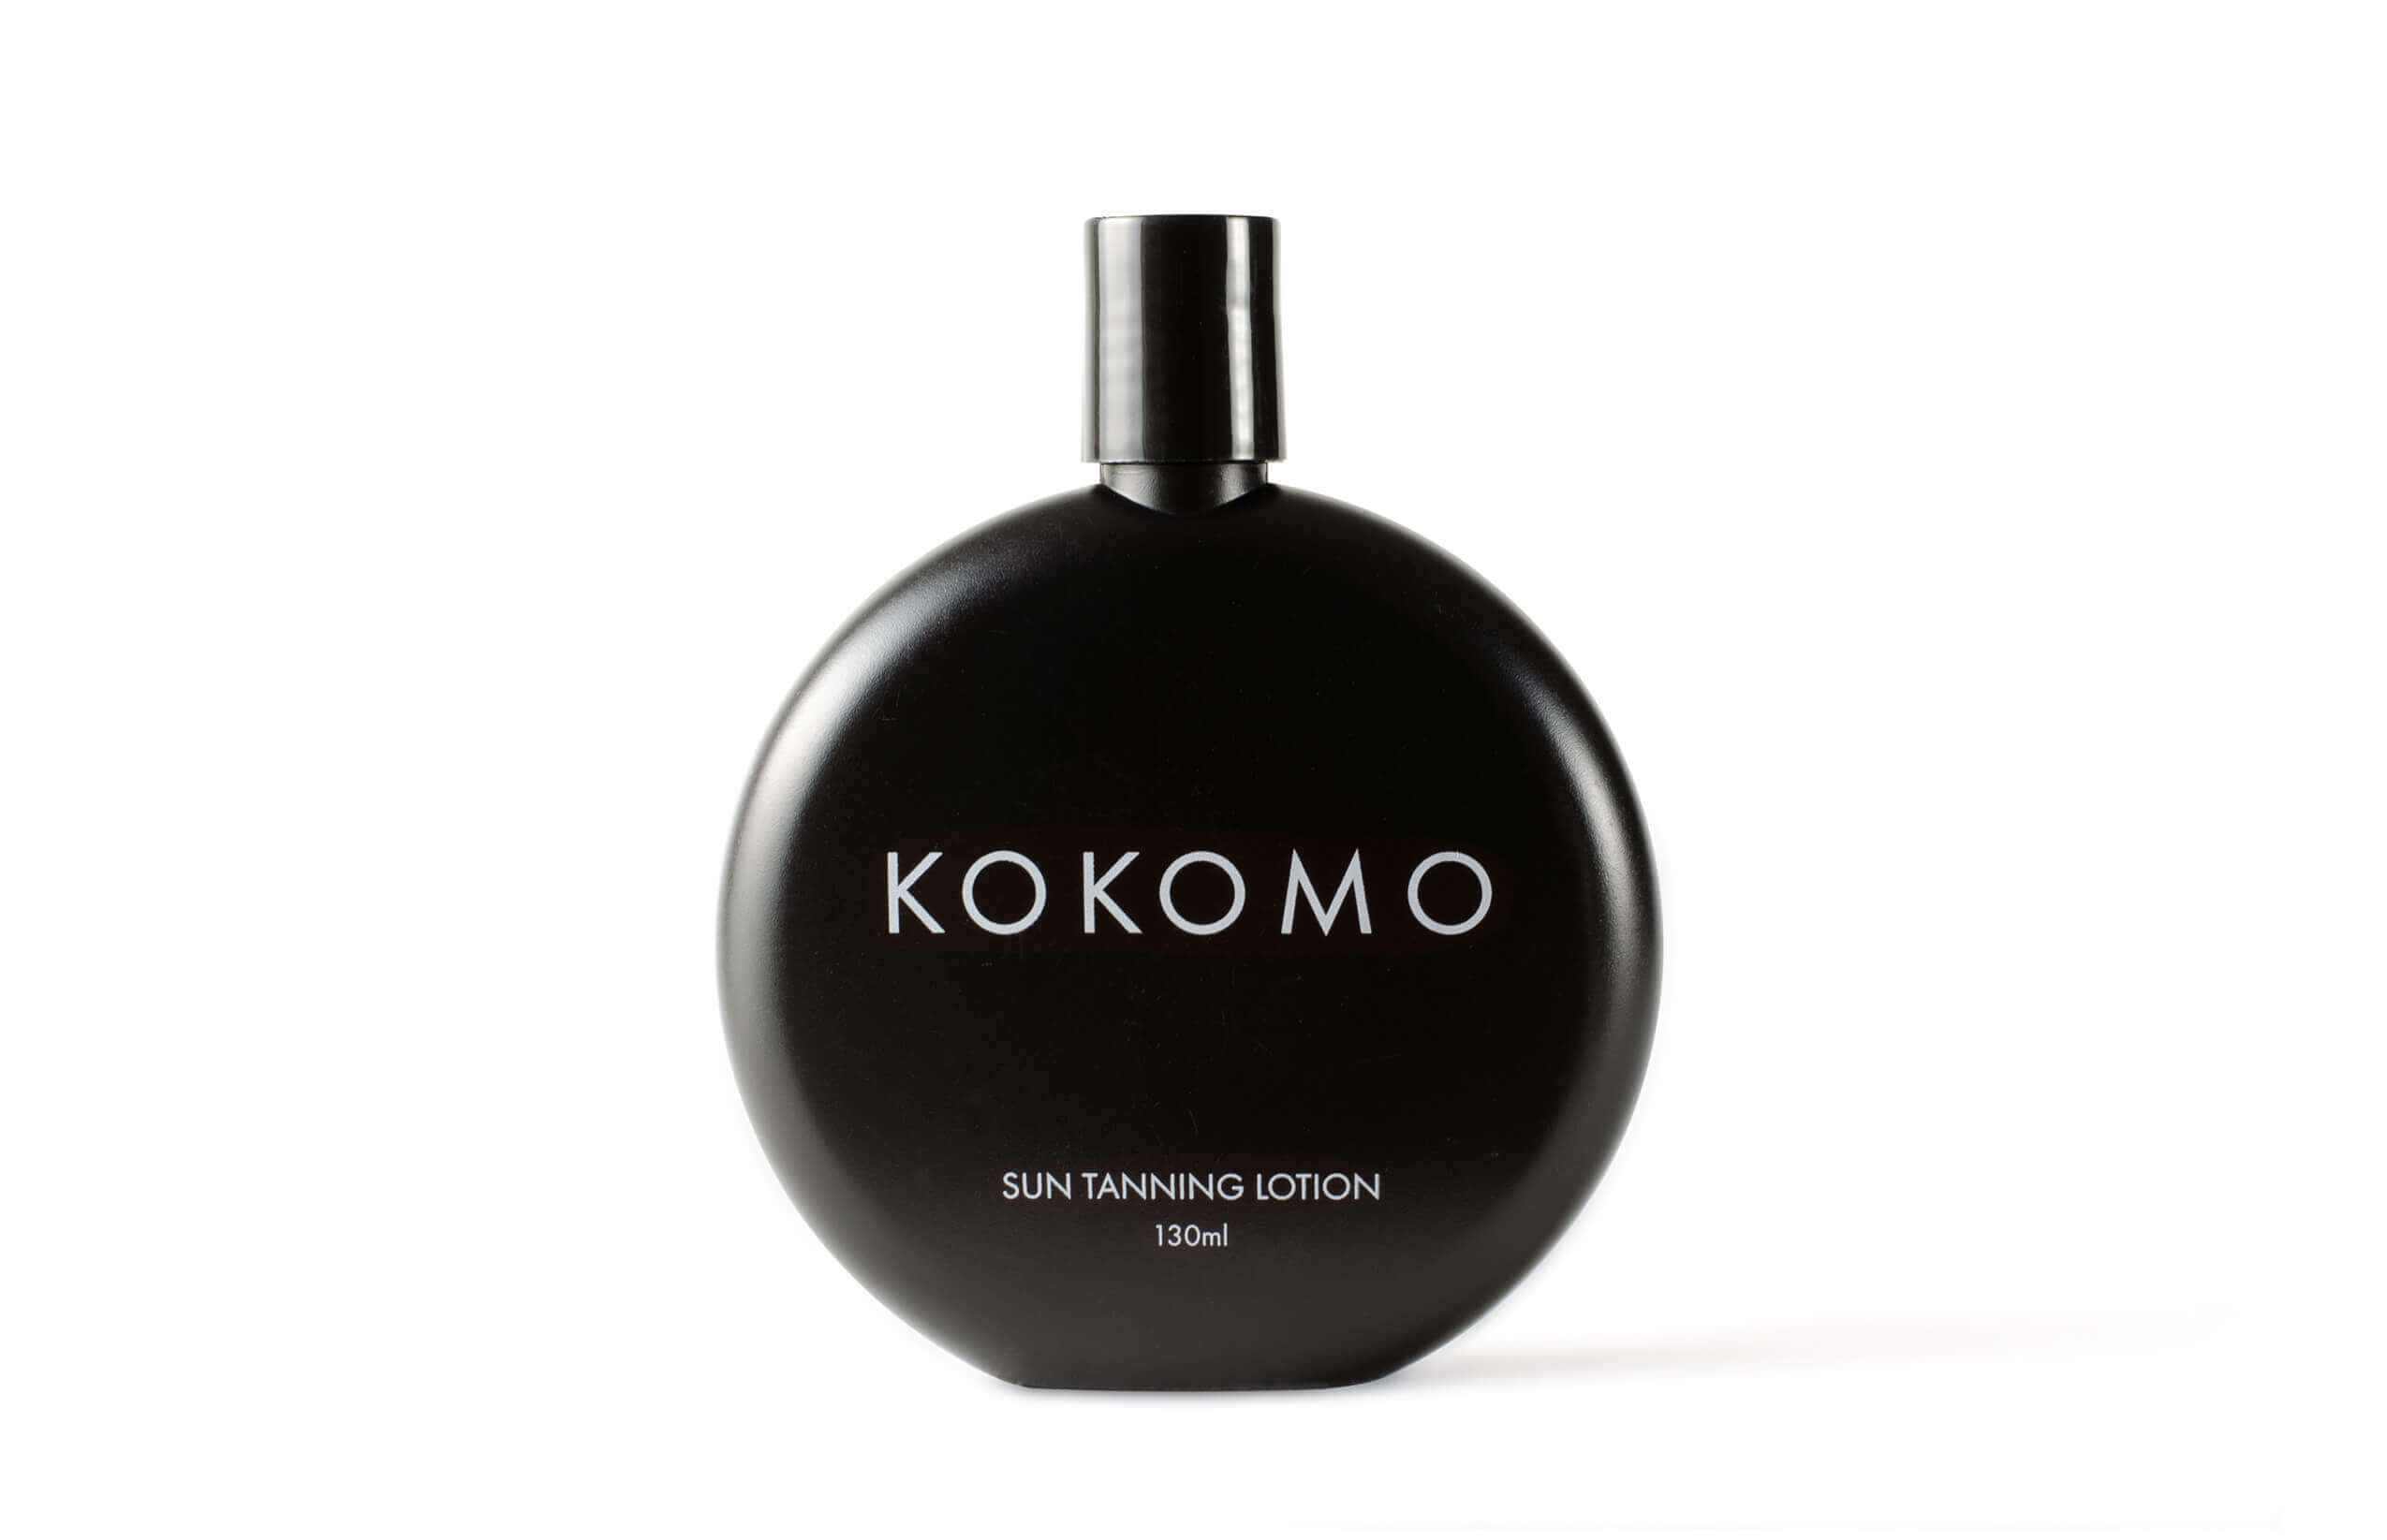 Icon Graphic Design - Label and packaging design Adelaide image of a Kokomo Sun Tanning Lotion bottle front on.